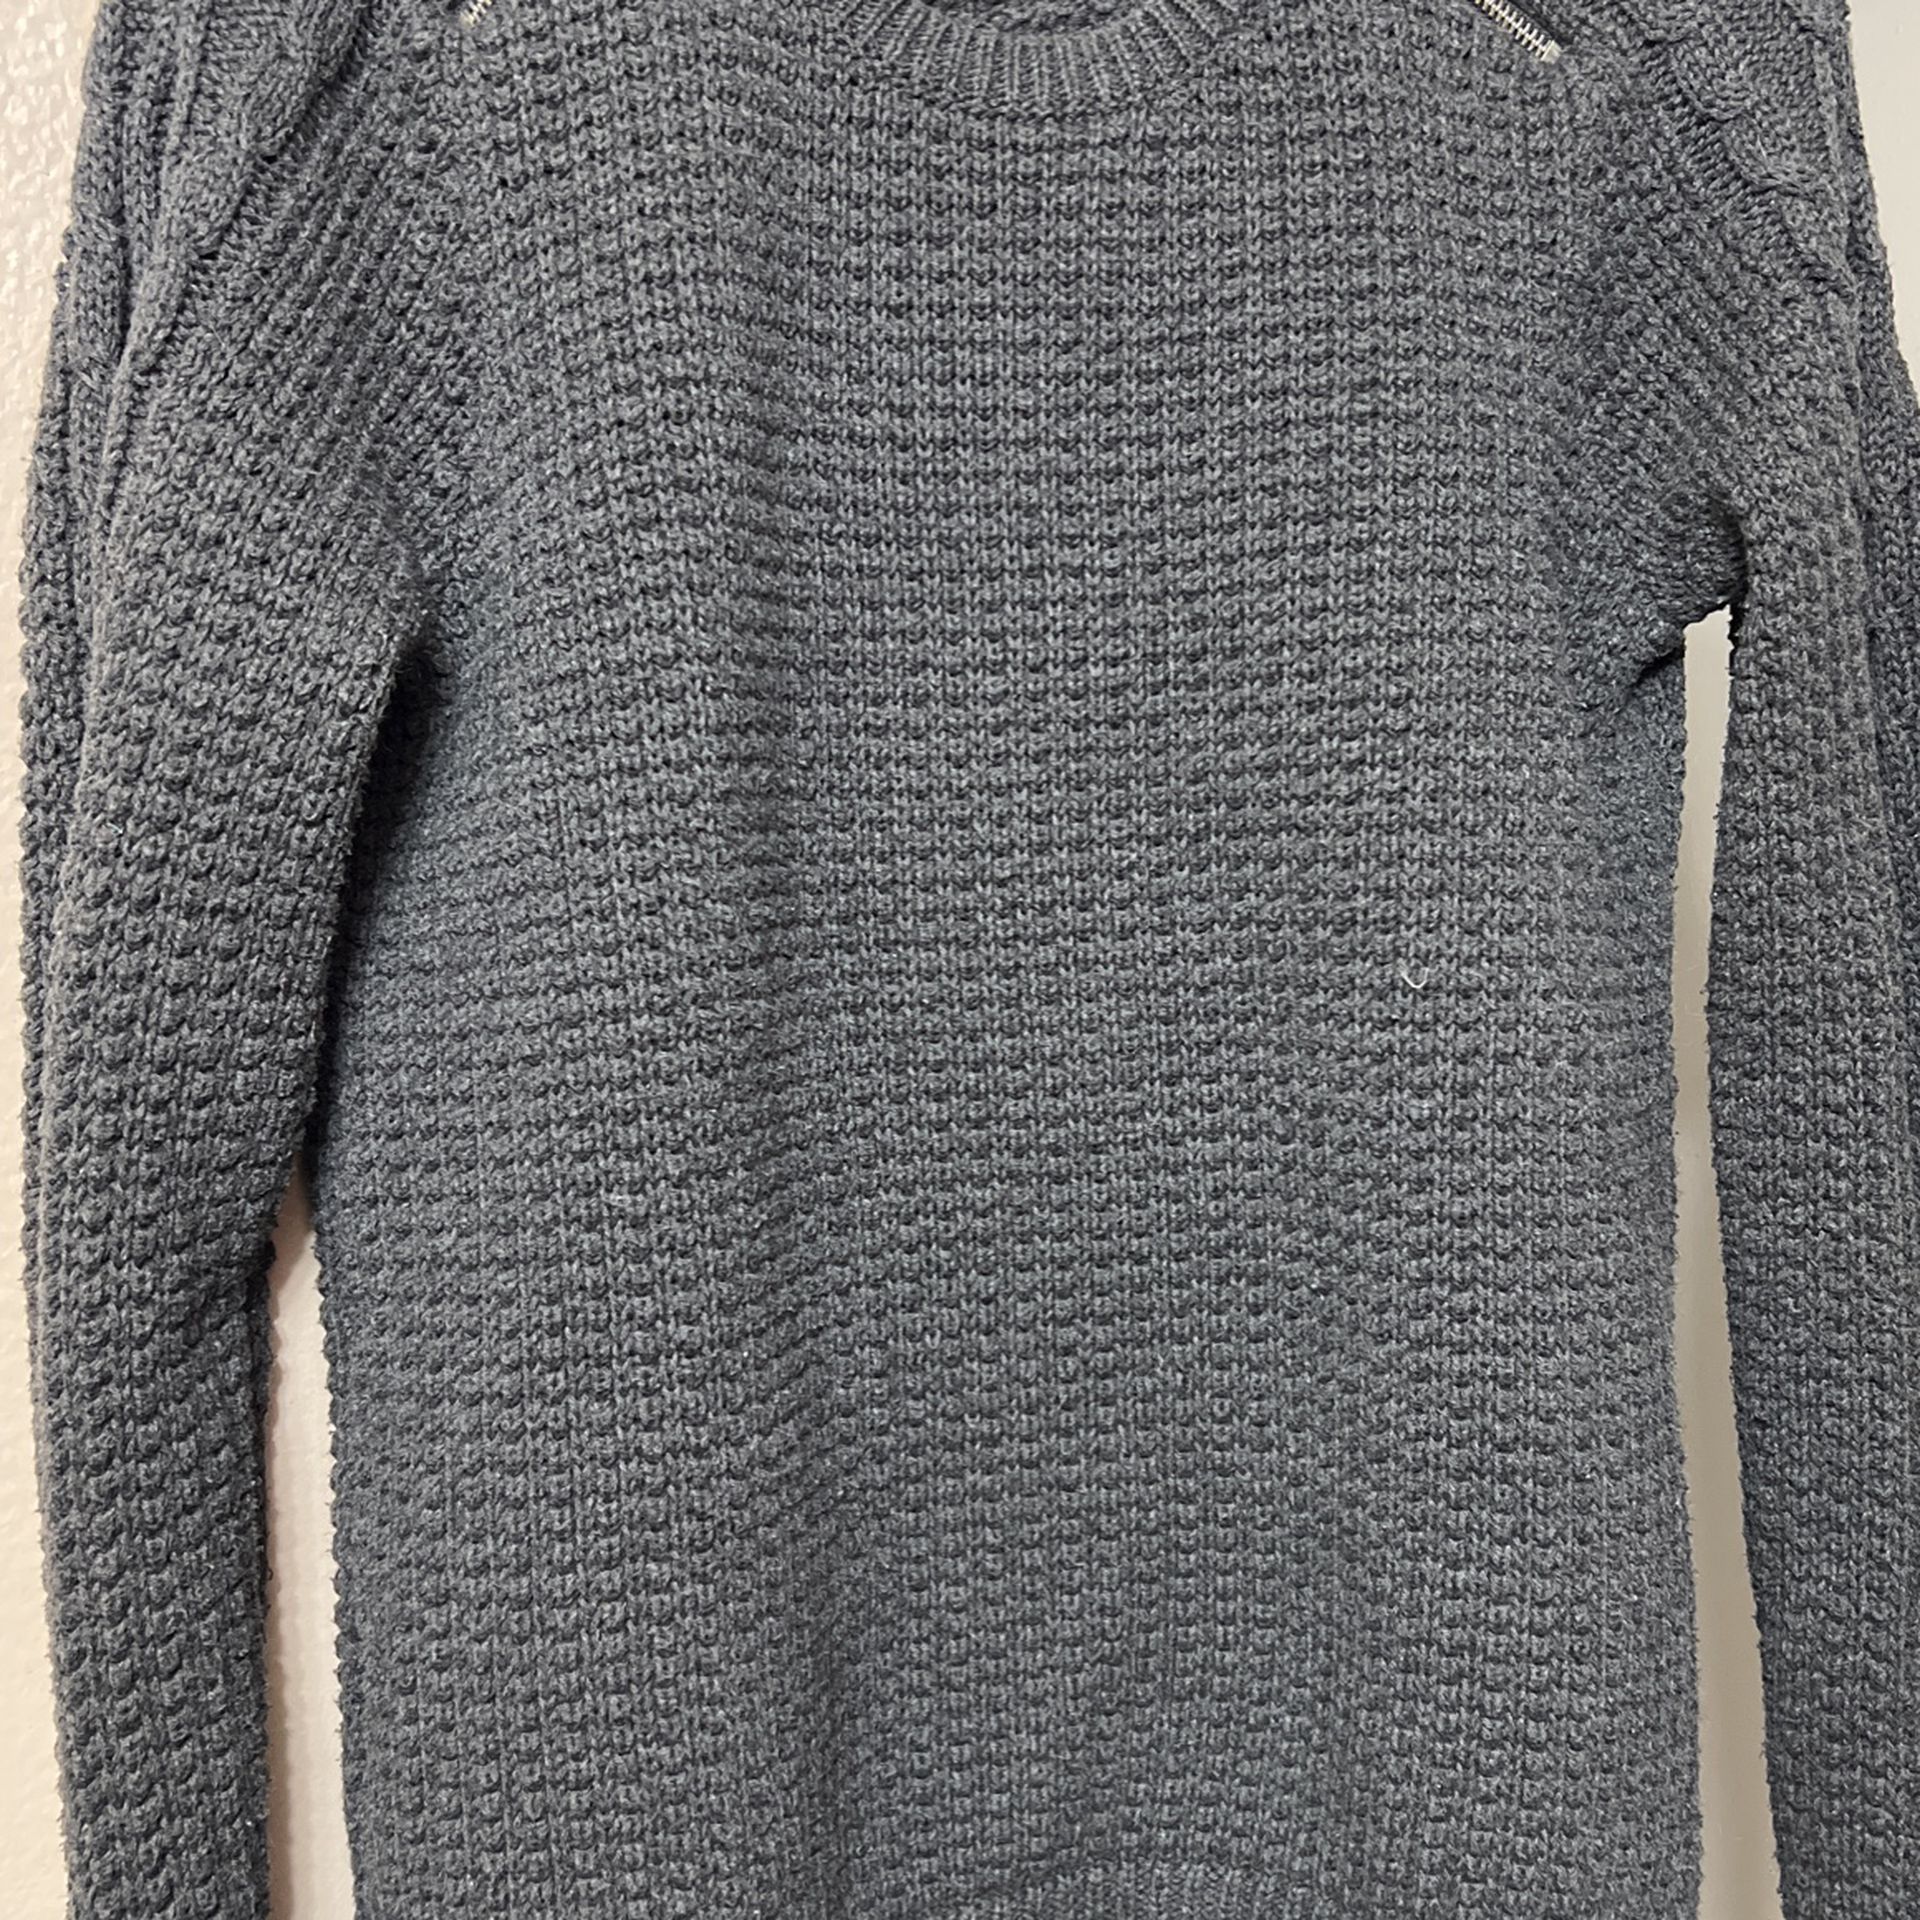 Authentic Michael Kors Sweater Size Small